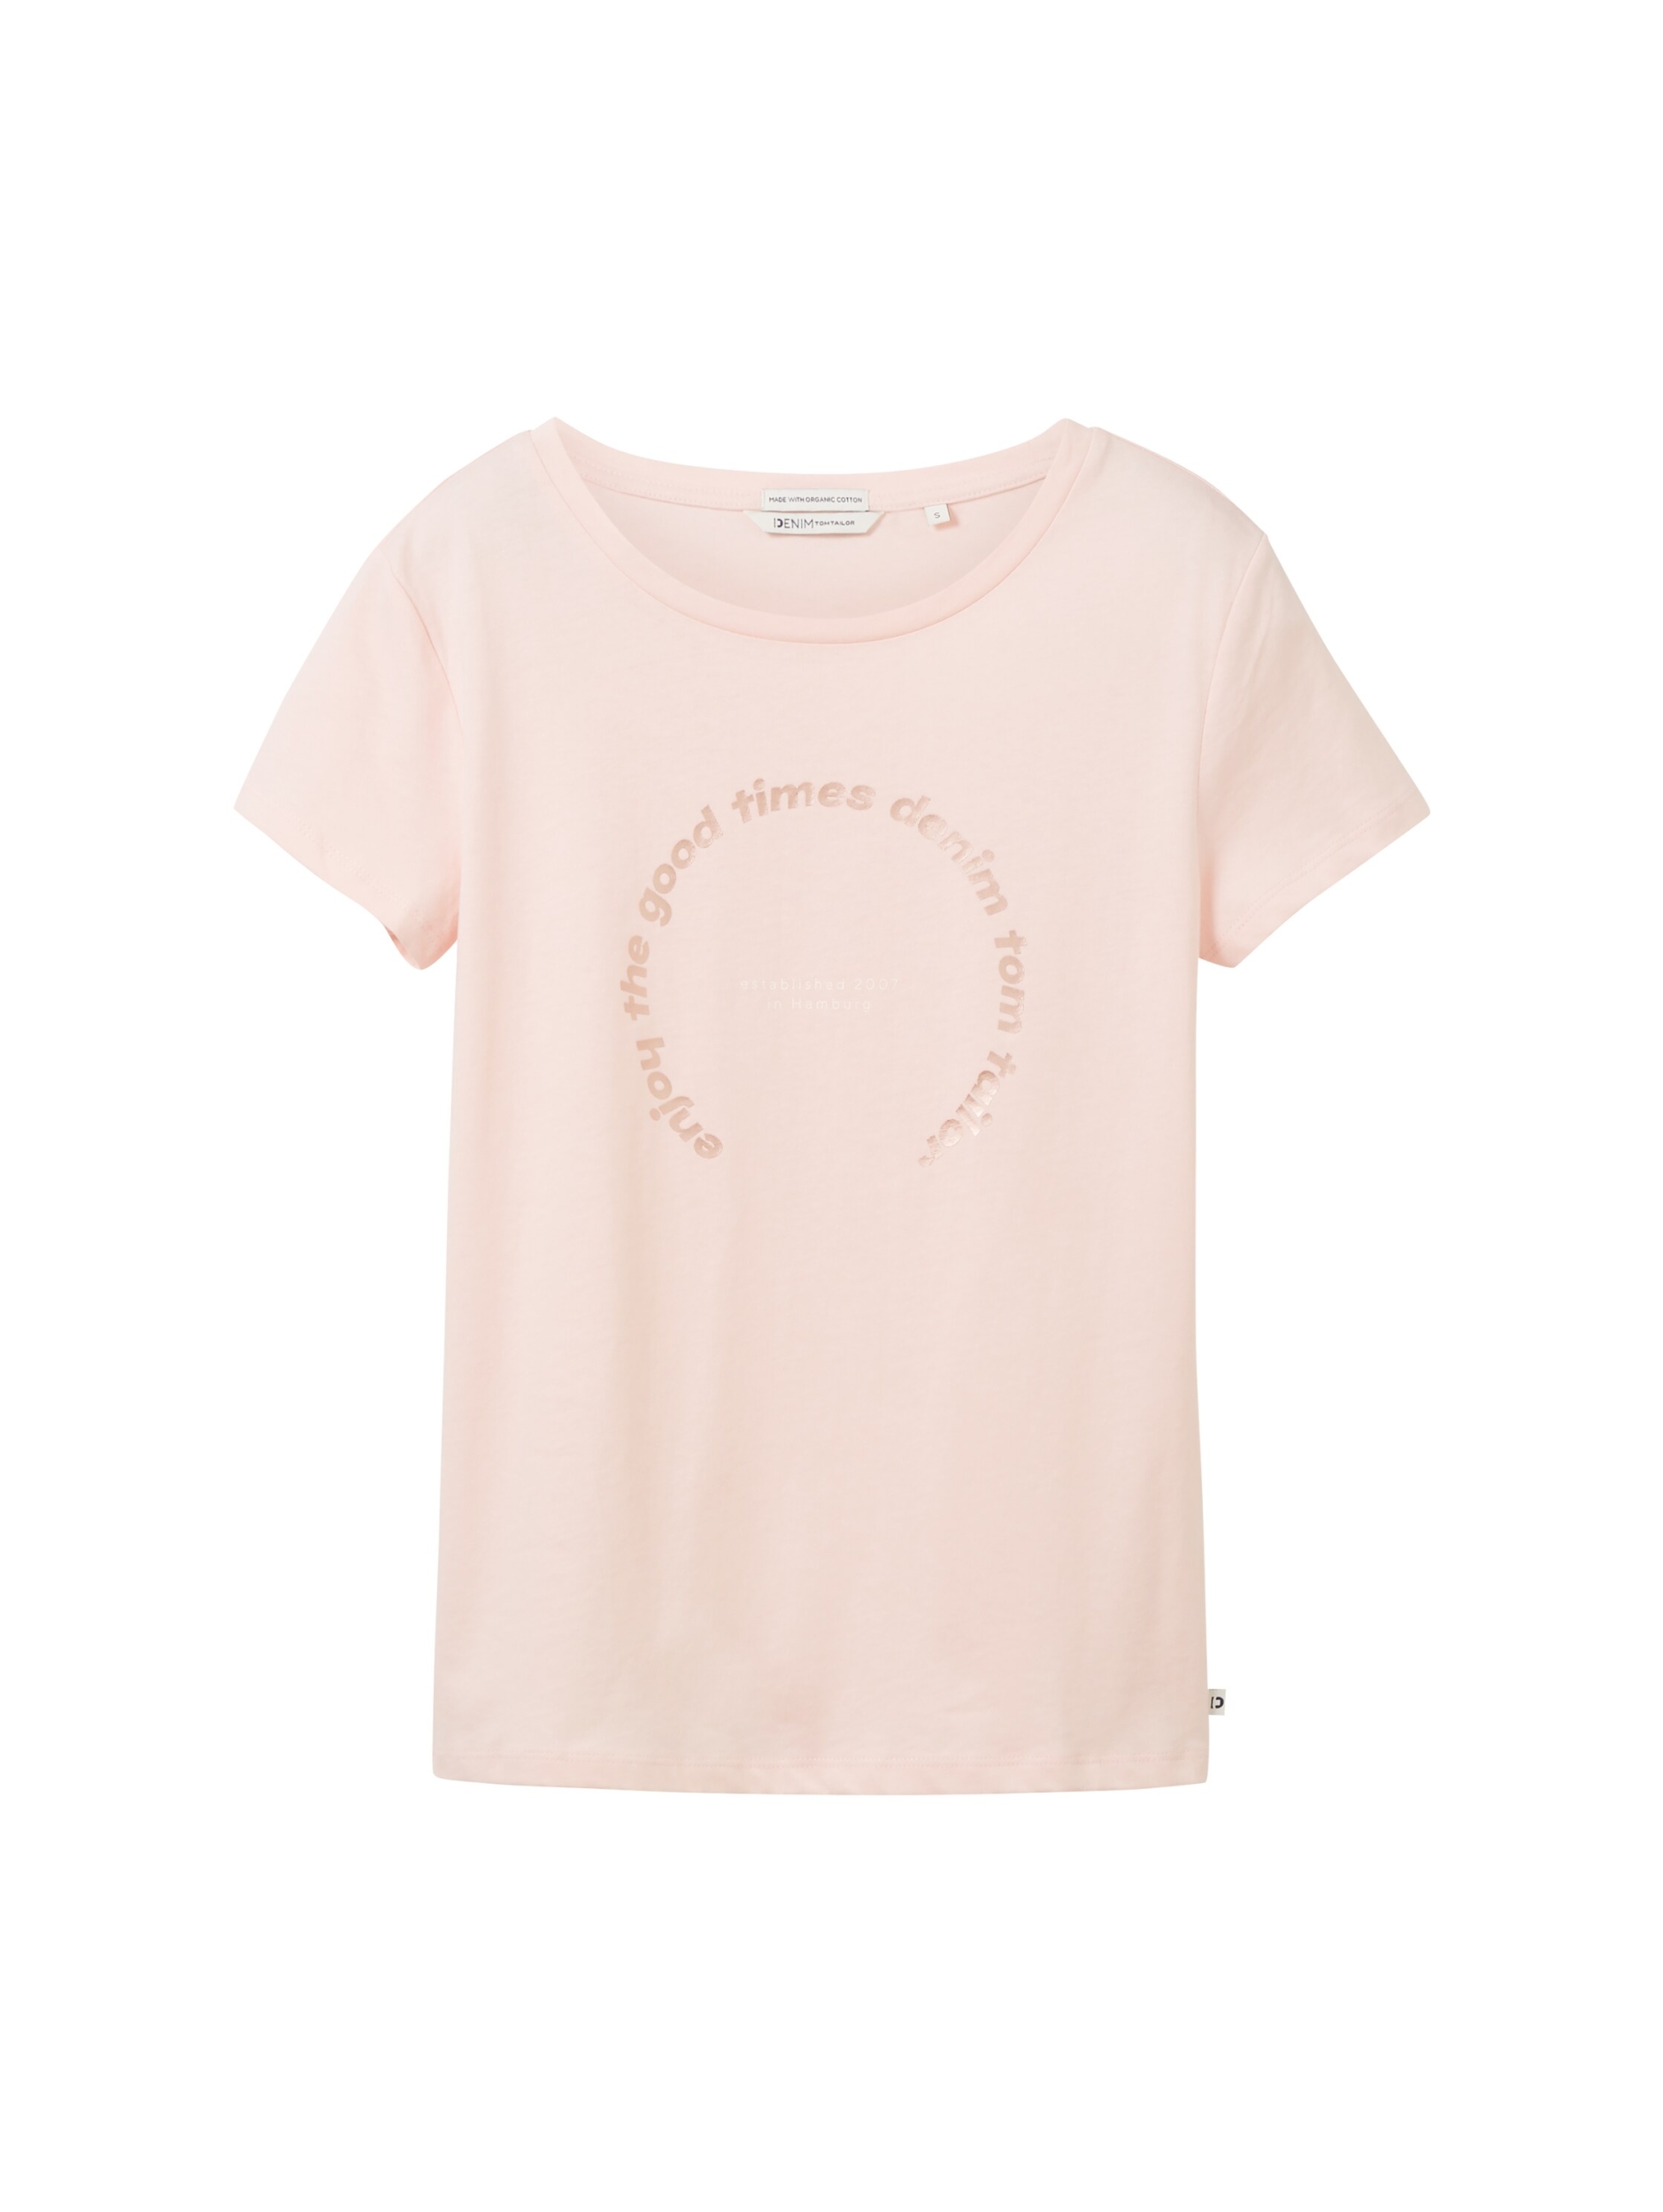 M | | 1038353-14557_Light-M | fitted rose with T-shirt print english light